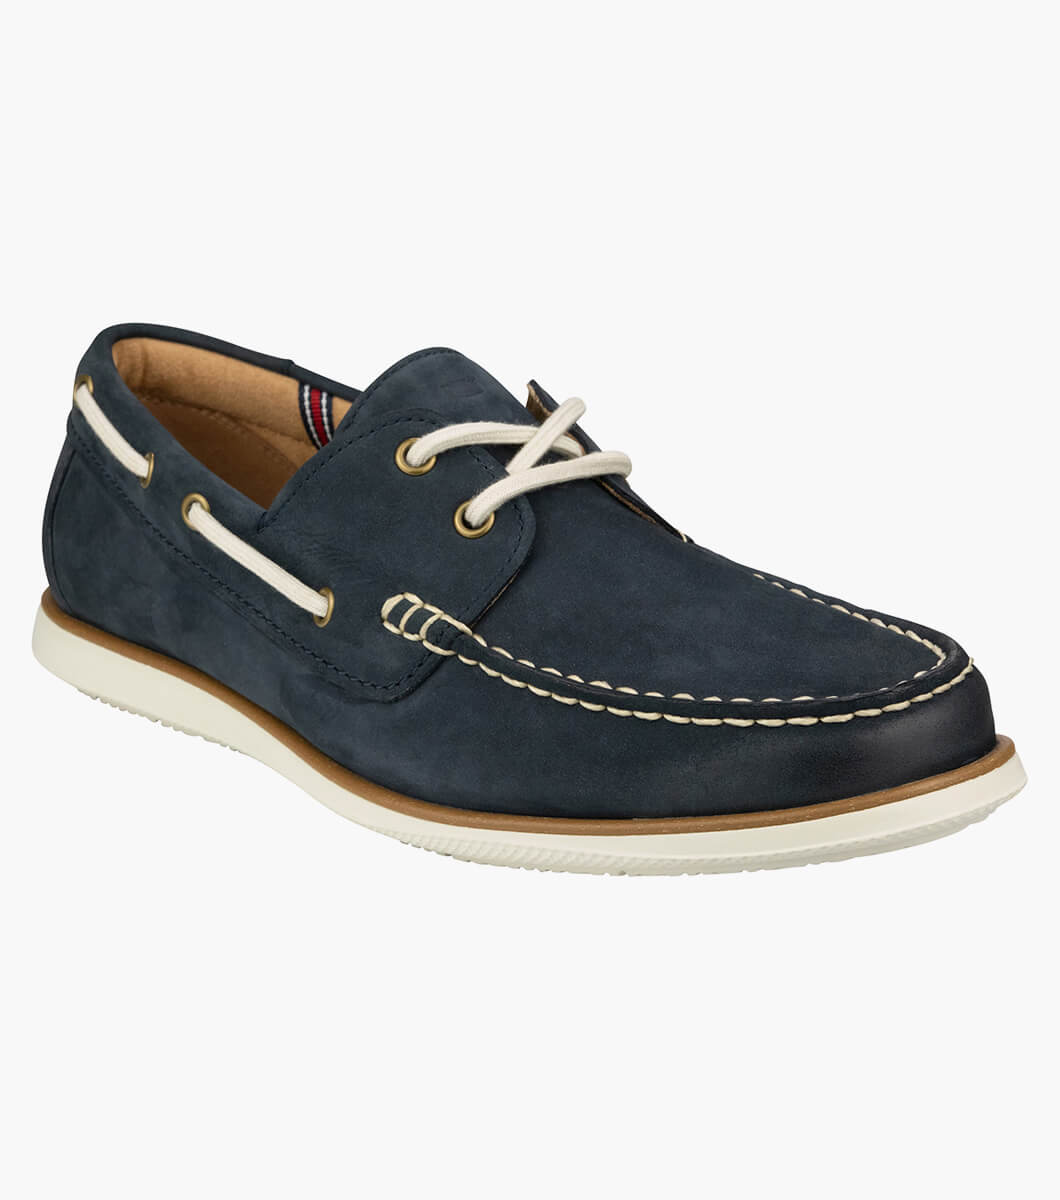 Colour-Blocked Leather Boat Shoes | BLUE | Tommy Hilfiger